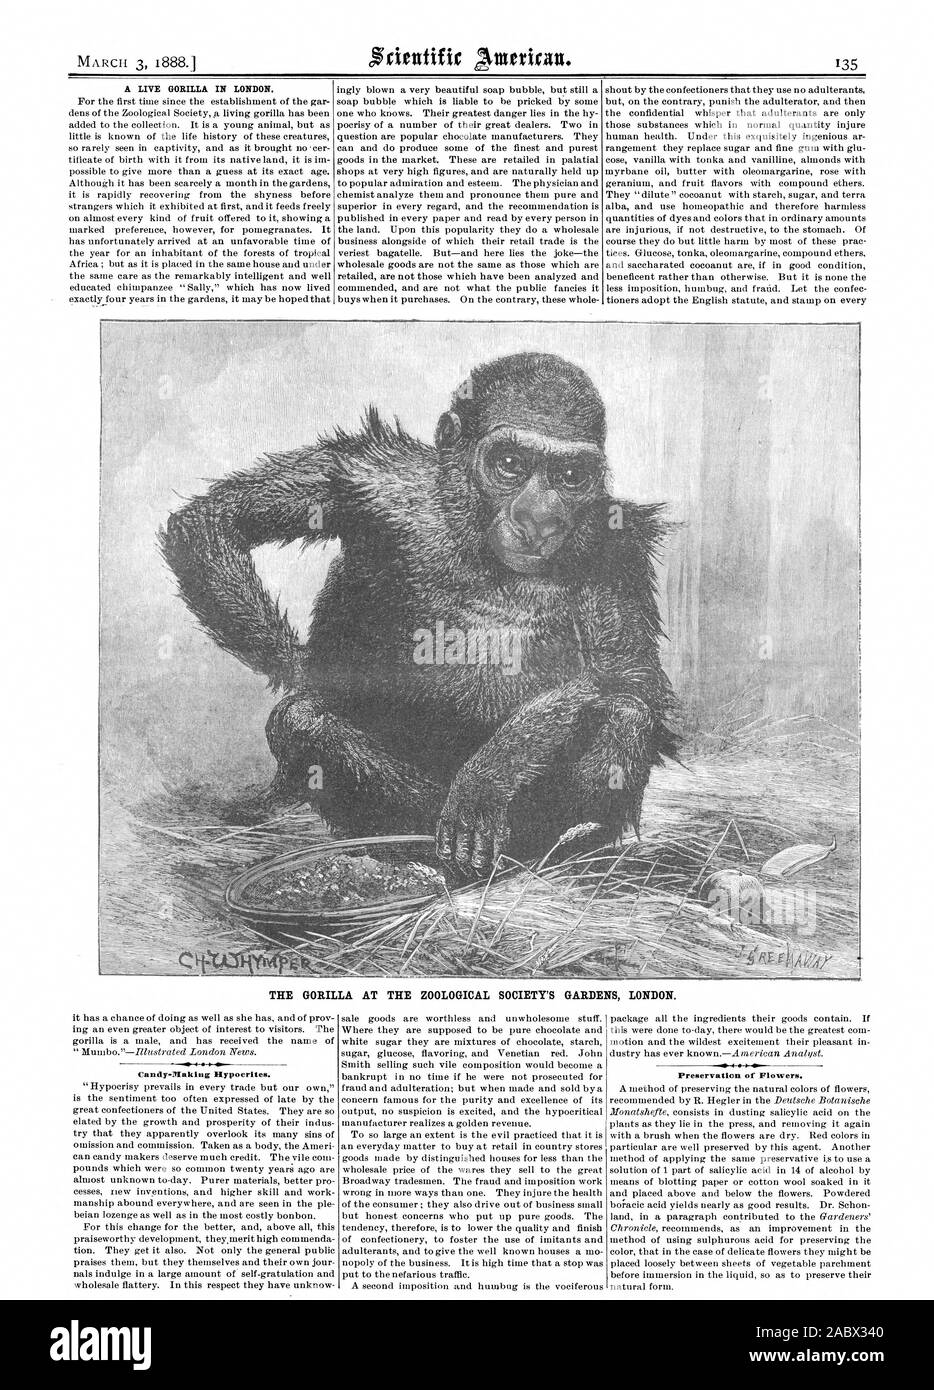 A LIVE GORILLA IN LONDON. THE GORILLA AT THE ZOOLOGICAL SOCIETY'S GARDENS LONDON. Candy-Making Hypocrites. Preservation of Flowers., scientific american, 1888-03-03 Stock Photo